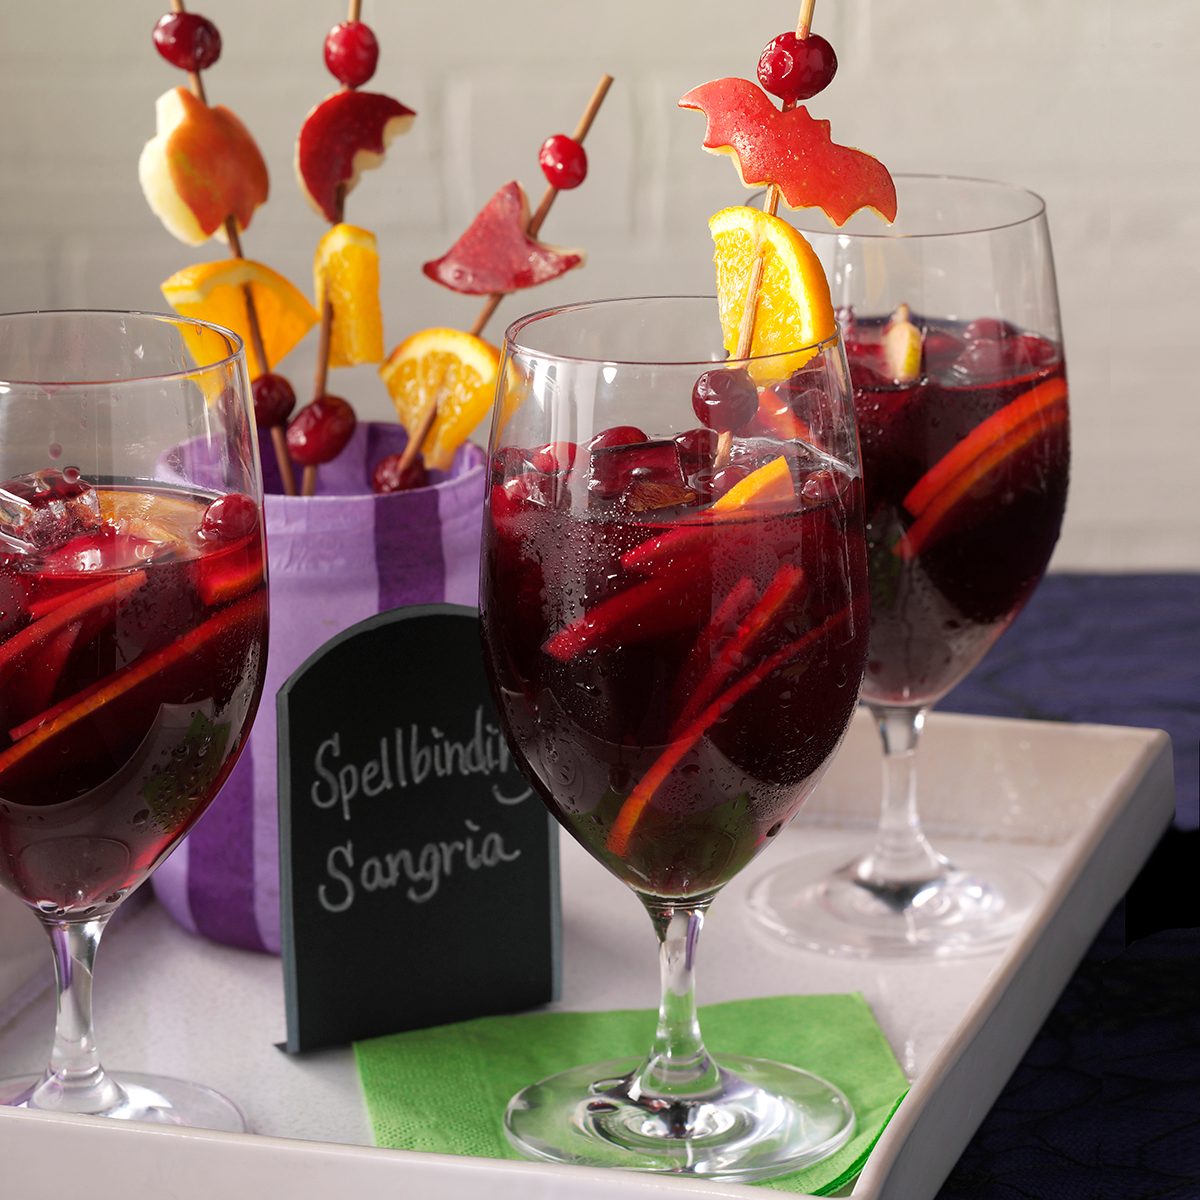 Three sangrias with fruit shaped like bats and pumpkins skewered and stuck inside